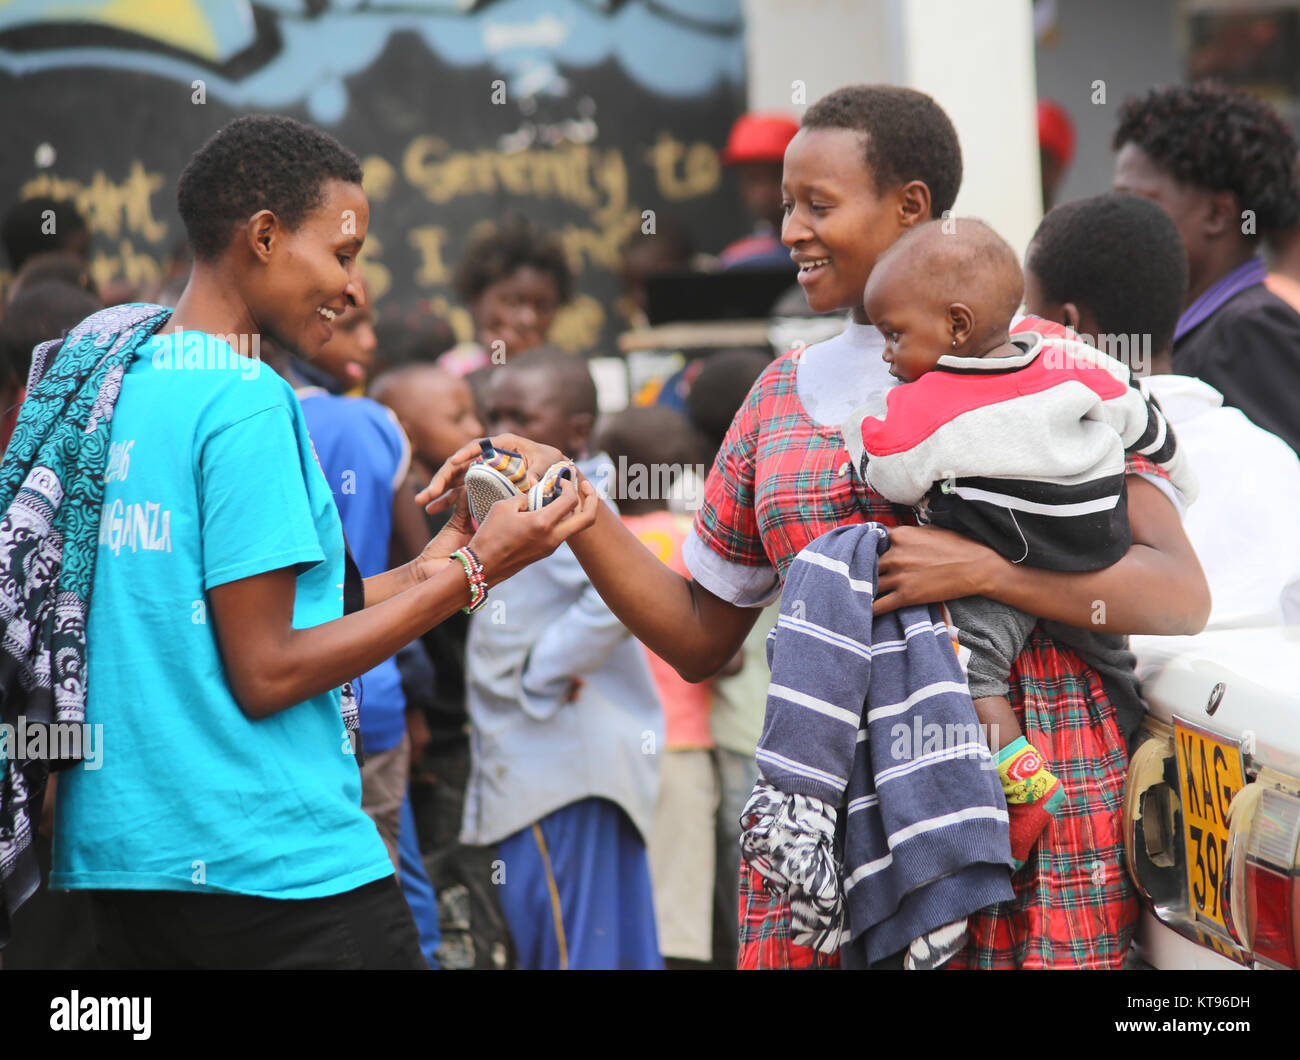 Nairobi, Kenya. 22nd Dec, 2017. Some of Kororgocho slum dwellers in Nairobi hold baby's shoes donated through an initiative dubbed ''˜Mng'aro Mtaani' ahead of Christmas celebration where people across the city give out clothing they don't use to the less fortunate. Initiative's founder Mr. Sam Omoll ''“ Torez who grew up in the slum said over 60,000 people living in Korogocho lack basic needs among them shelter, clothing, clean water and food. Majority survive on less than 1 USD a day, experience high crime rate, lack good education and health facilities. (Credit Image: © Billy Stock Photo